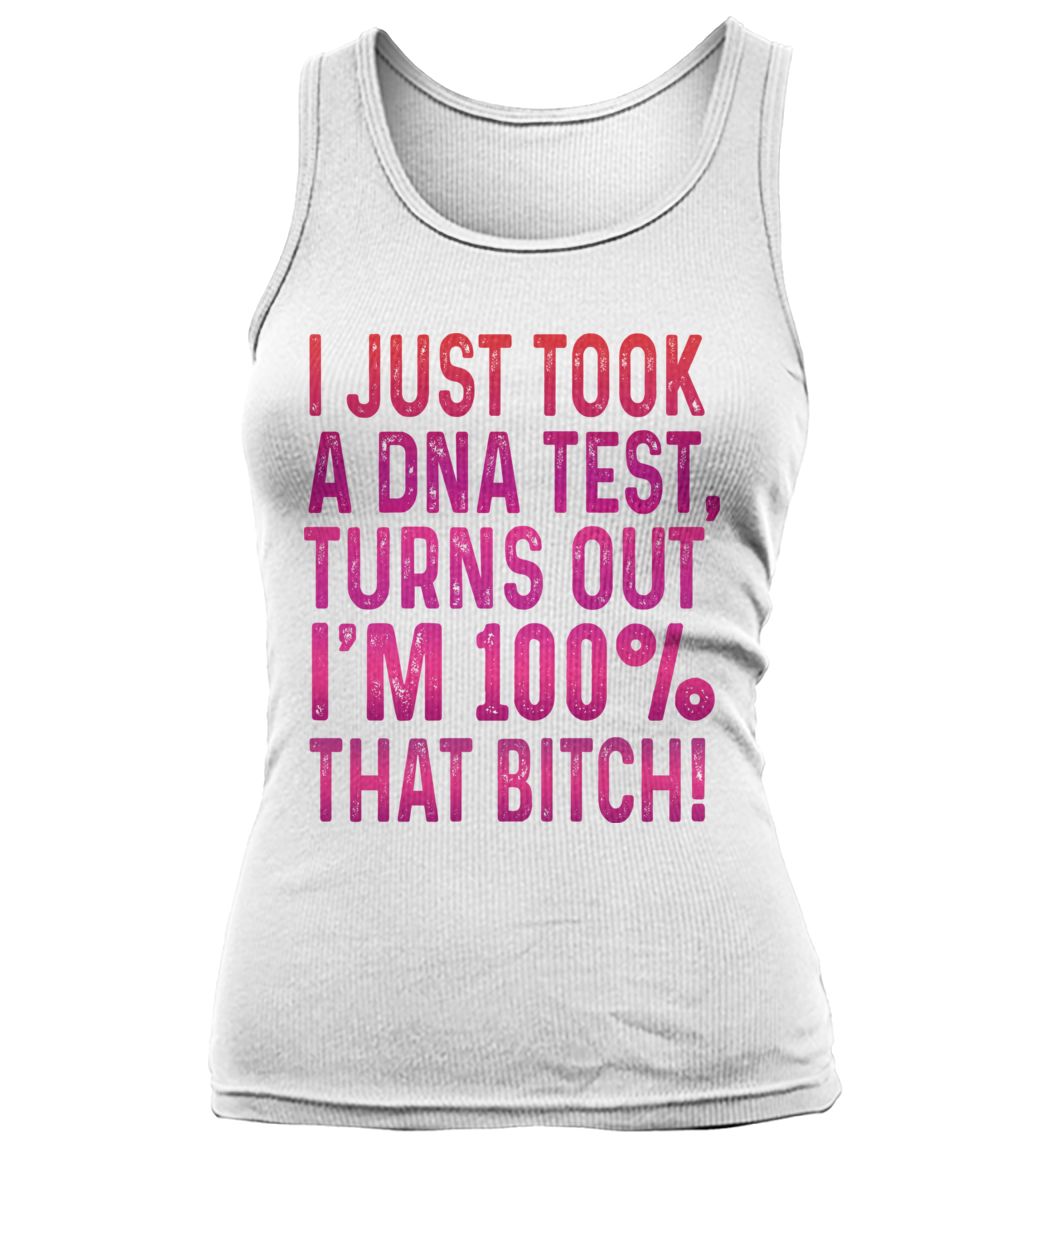 I just took a DNA test turns out I'm 100% that bitch women's tank top